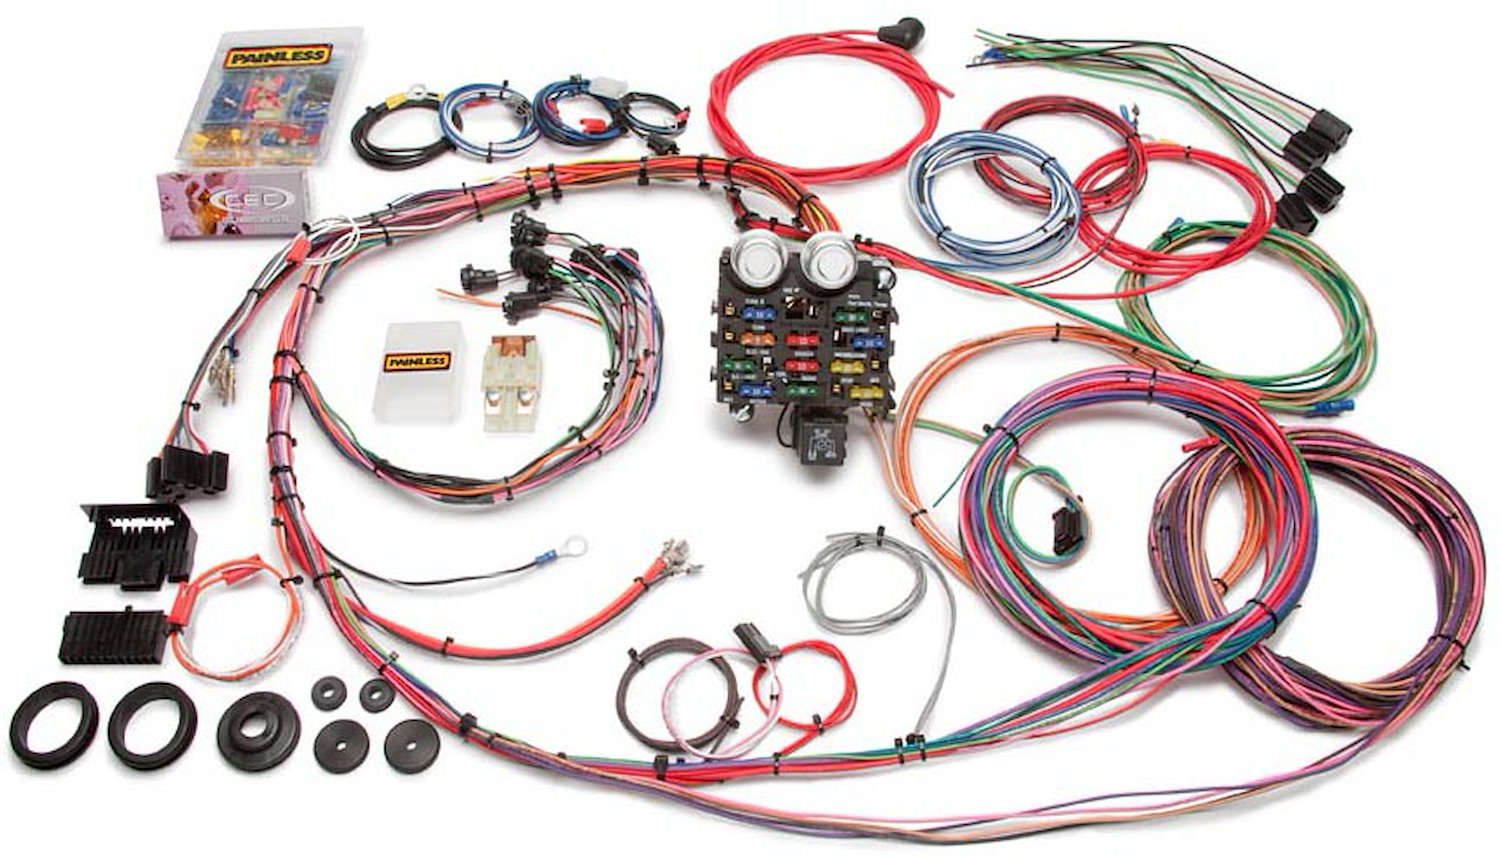 19-Circuit Classic GM Truck Chassis Harness 1963-66 Chevy/GMC Truck